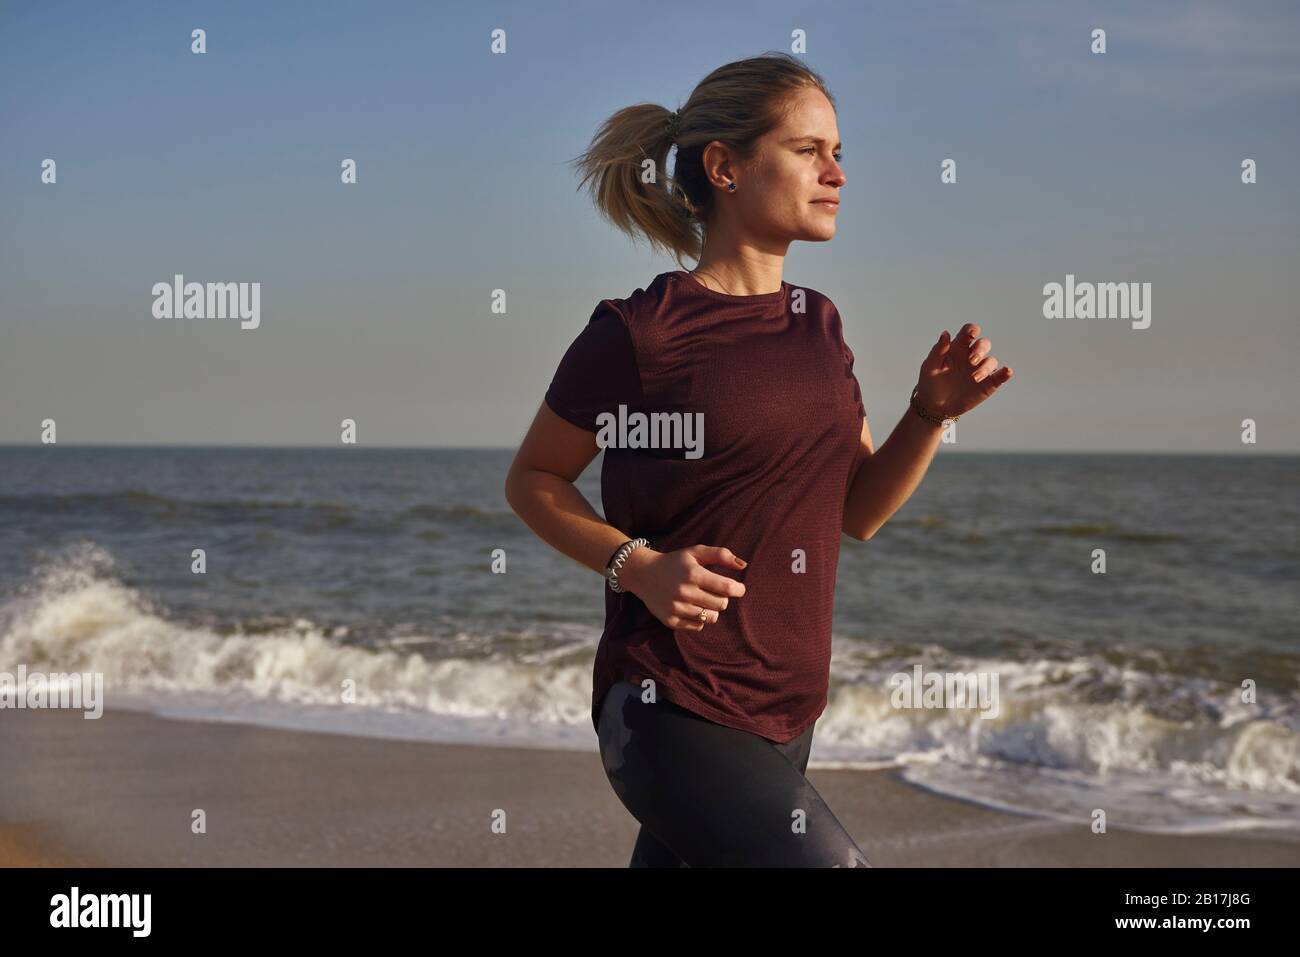 Young woman running on the beach Stock Photo